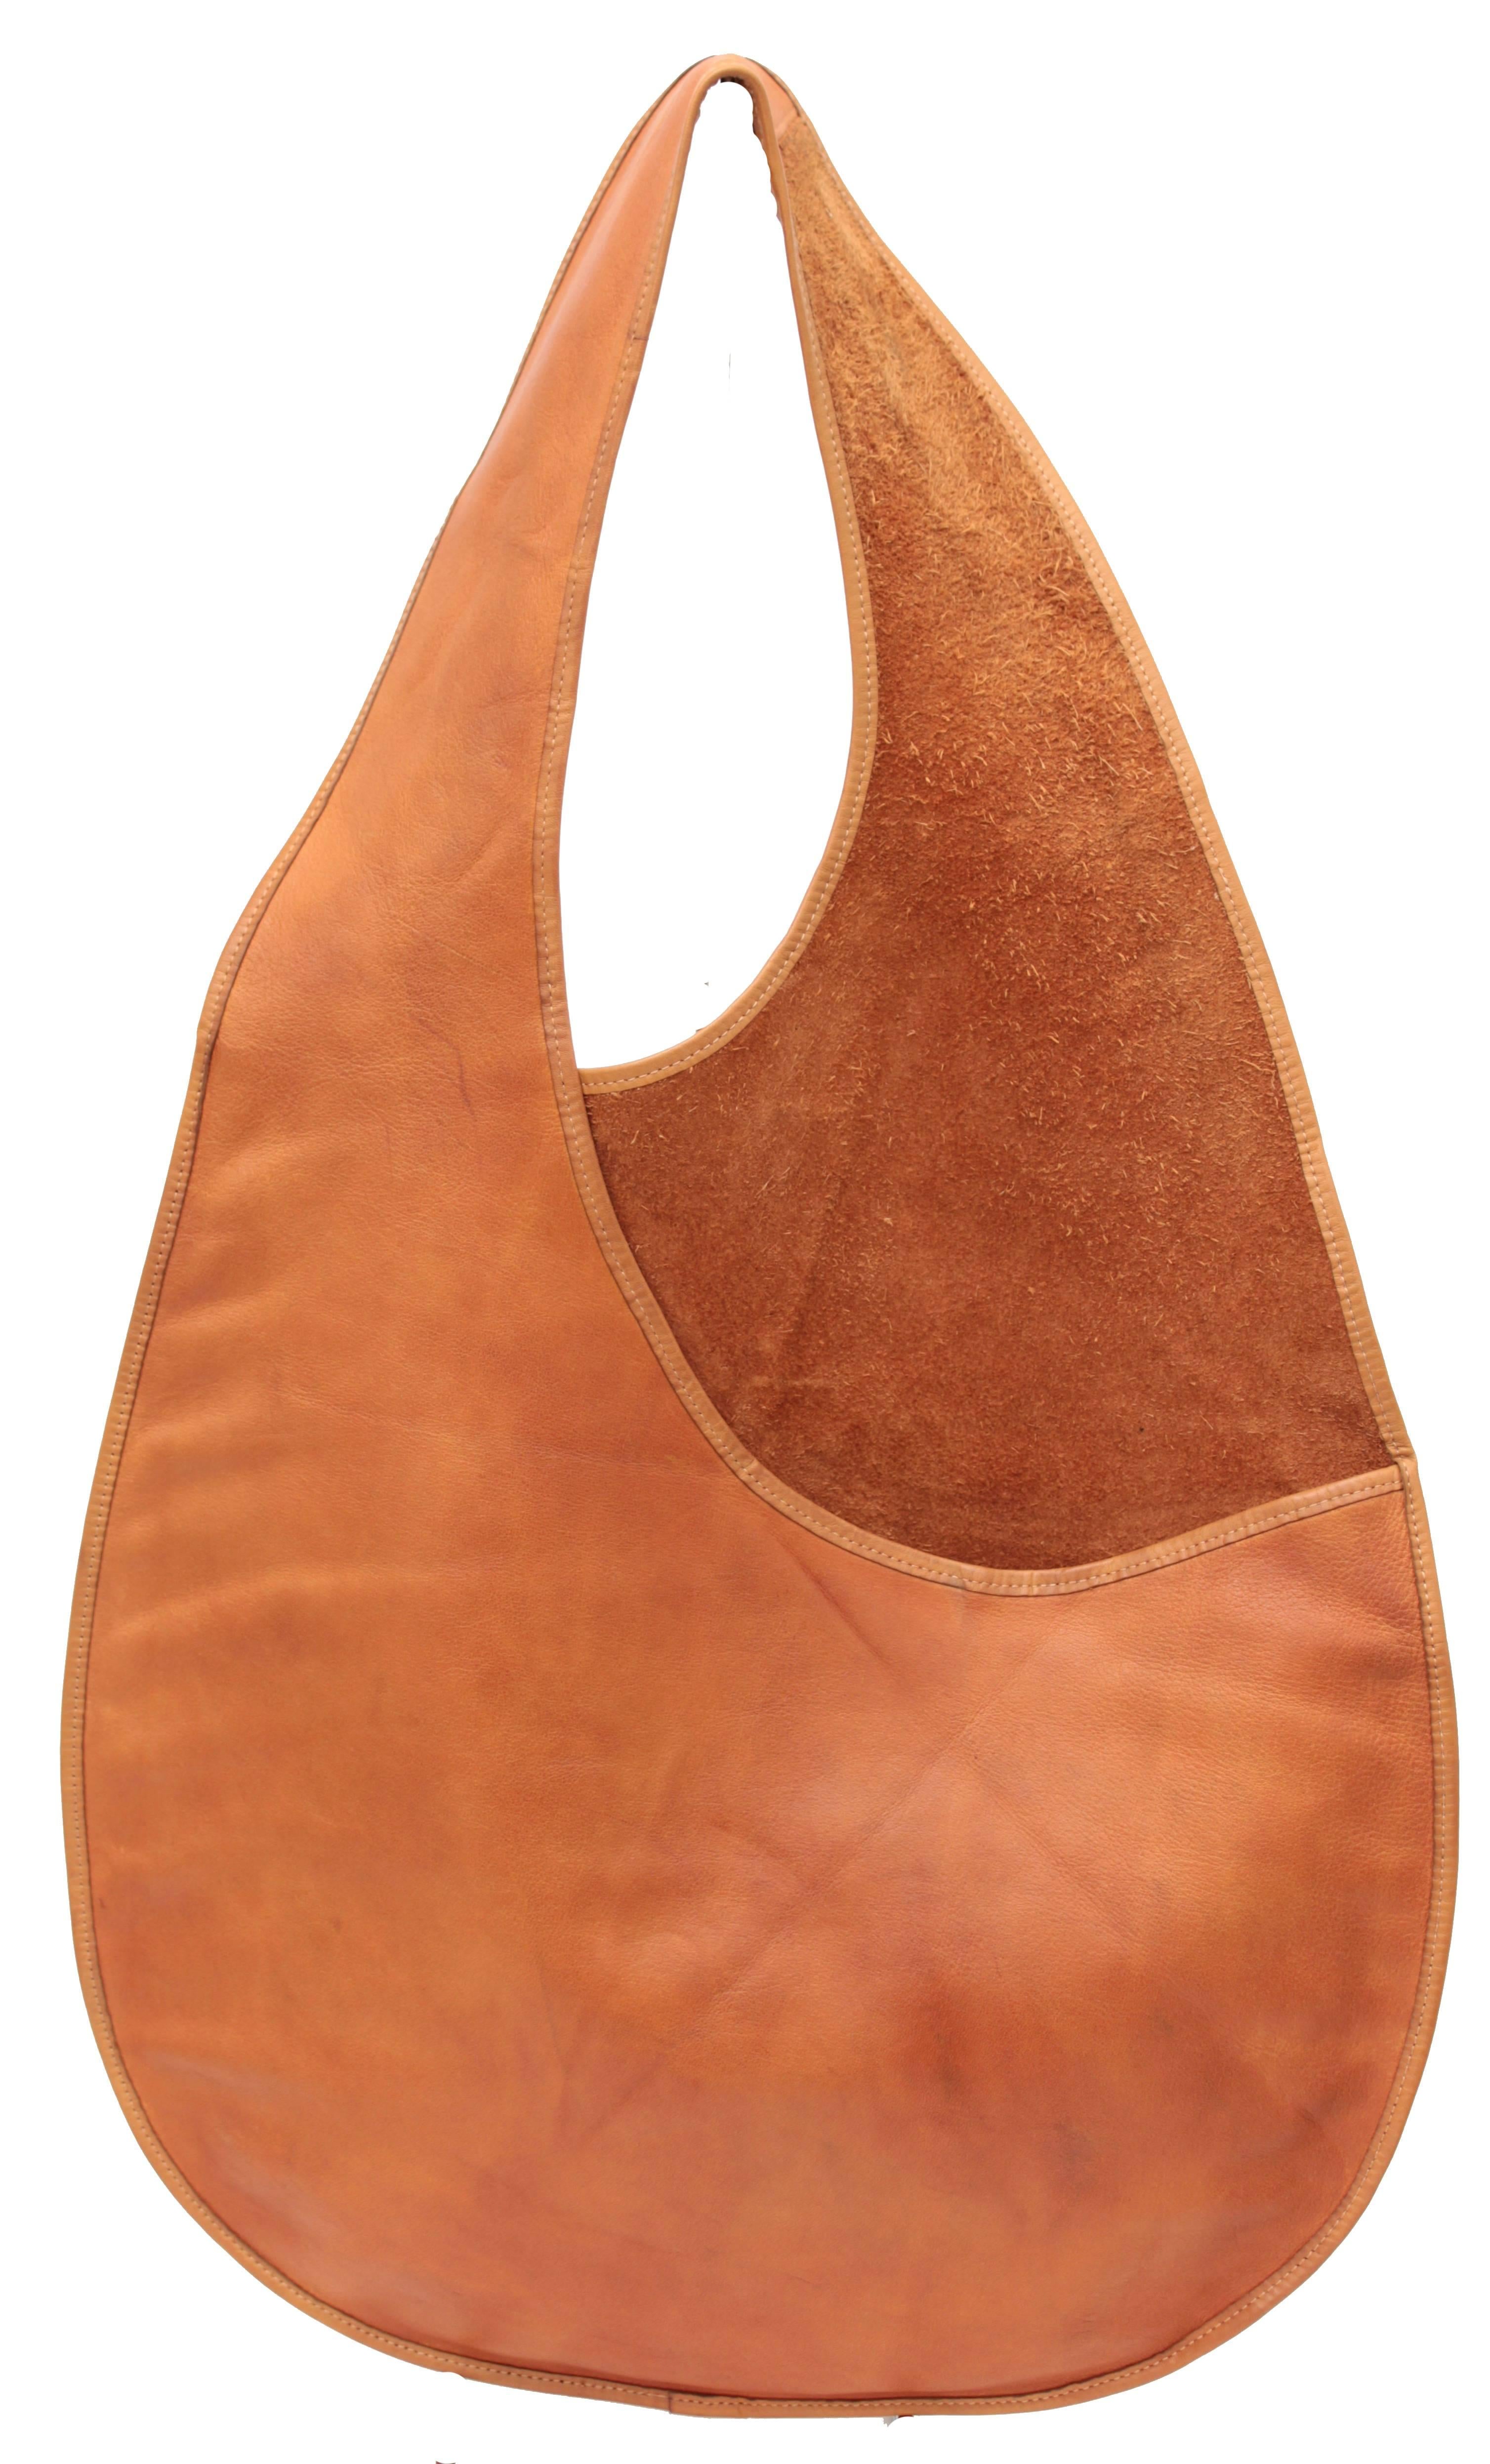 This mod sling bag was designed by Bonnie Cashin during her time at Coach Leatherware circa mid 1960s. According to an article in ELLE magazine from 2011, FIT has one of these bags in their museum collection, and I believe another lives within the